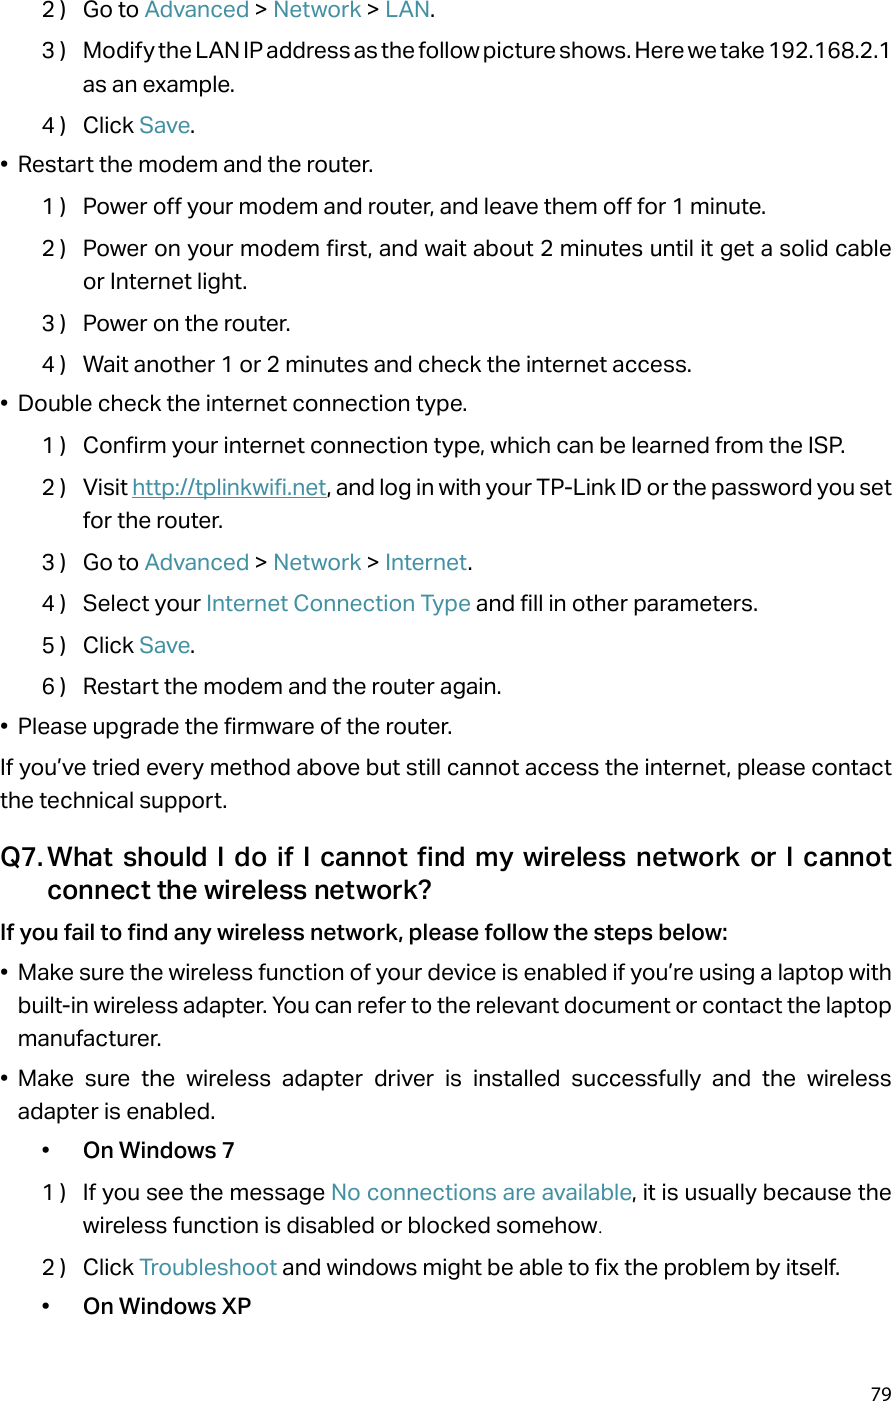 792 )  Go to Advanced &gt; Network &gt; LAN.3 )  Modify the LAN IP address as the follow picture shows. Here we take 192.168.2.1 as an example.4 )  Click Save.•  Restart the modem and the router.1 )  Power off your modem and router, and leave them off for 1 minute.2 )  Power on your modem first, and wait about 2 minutes until it get a solid cable or Internet light.3 )  Power on the router.4 )  Wait another 1 or 2 minutes and check the internet access.•  Double check the internet connection type.1 )  Confirm your internet connection type, which can be learned from the ISP.2 )  Visit http://tplinkwifi.net, and log in with your TP-Link ID or the password you set for the router.3 )  Go to Advanced &gt; Network &gt; Internet.4 )  Select your Internet Connection Type and fill in other parameters.5 )  Click Save.6 )  Restart the modem and the router again.•  Please upgrade the firmware of the router.If you’ve tried every method above but still cannot access the internet, please contact the technical support.Q7. What should I do if I cannot find my wireless network or I cannot connect the wireless network?If you fail to find any wireless network, please follow the steps below:•  Make sure the wireless function of your device is enabled if you’re using a laptop with built-in wireless adapter. You can refer to the relevant document or contact the laptop manufacturer.•  Make sure the wireless adapter driver is installed successfully and the wireless adapter is enabled.•  On Windows 71 )  If you see the message No connections are available, it is usually because the wireless function is disabled or blocked somehow.2 )  Click Troubleshoot and windows might be able to fix the problem by itself.•  On Windows XP